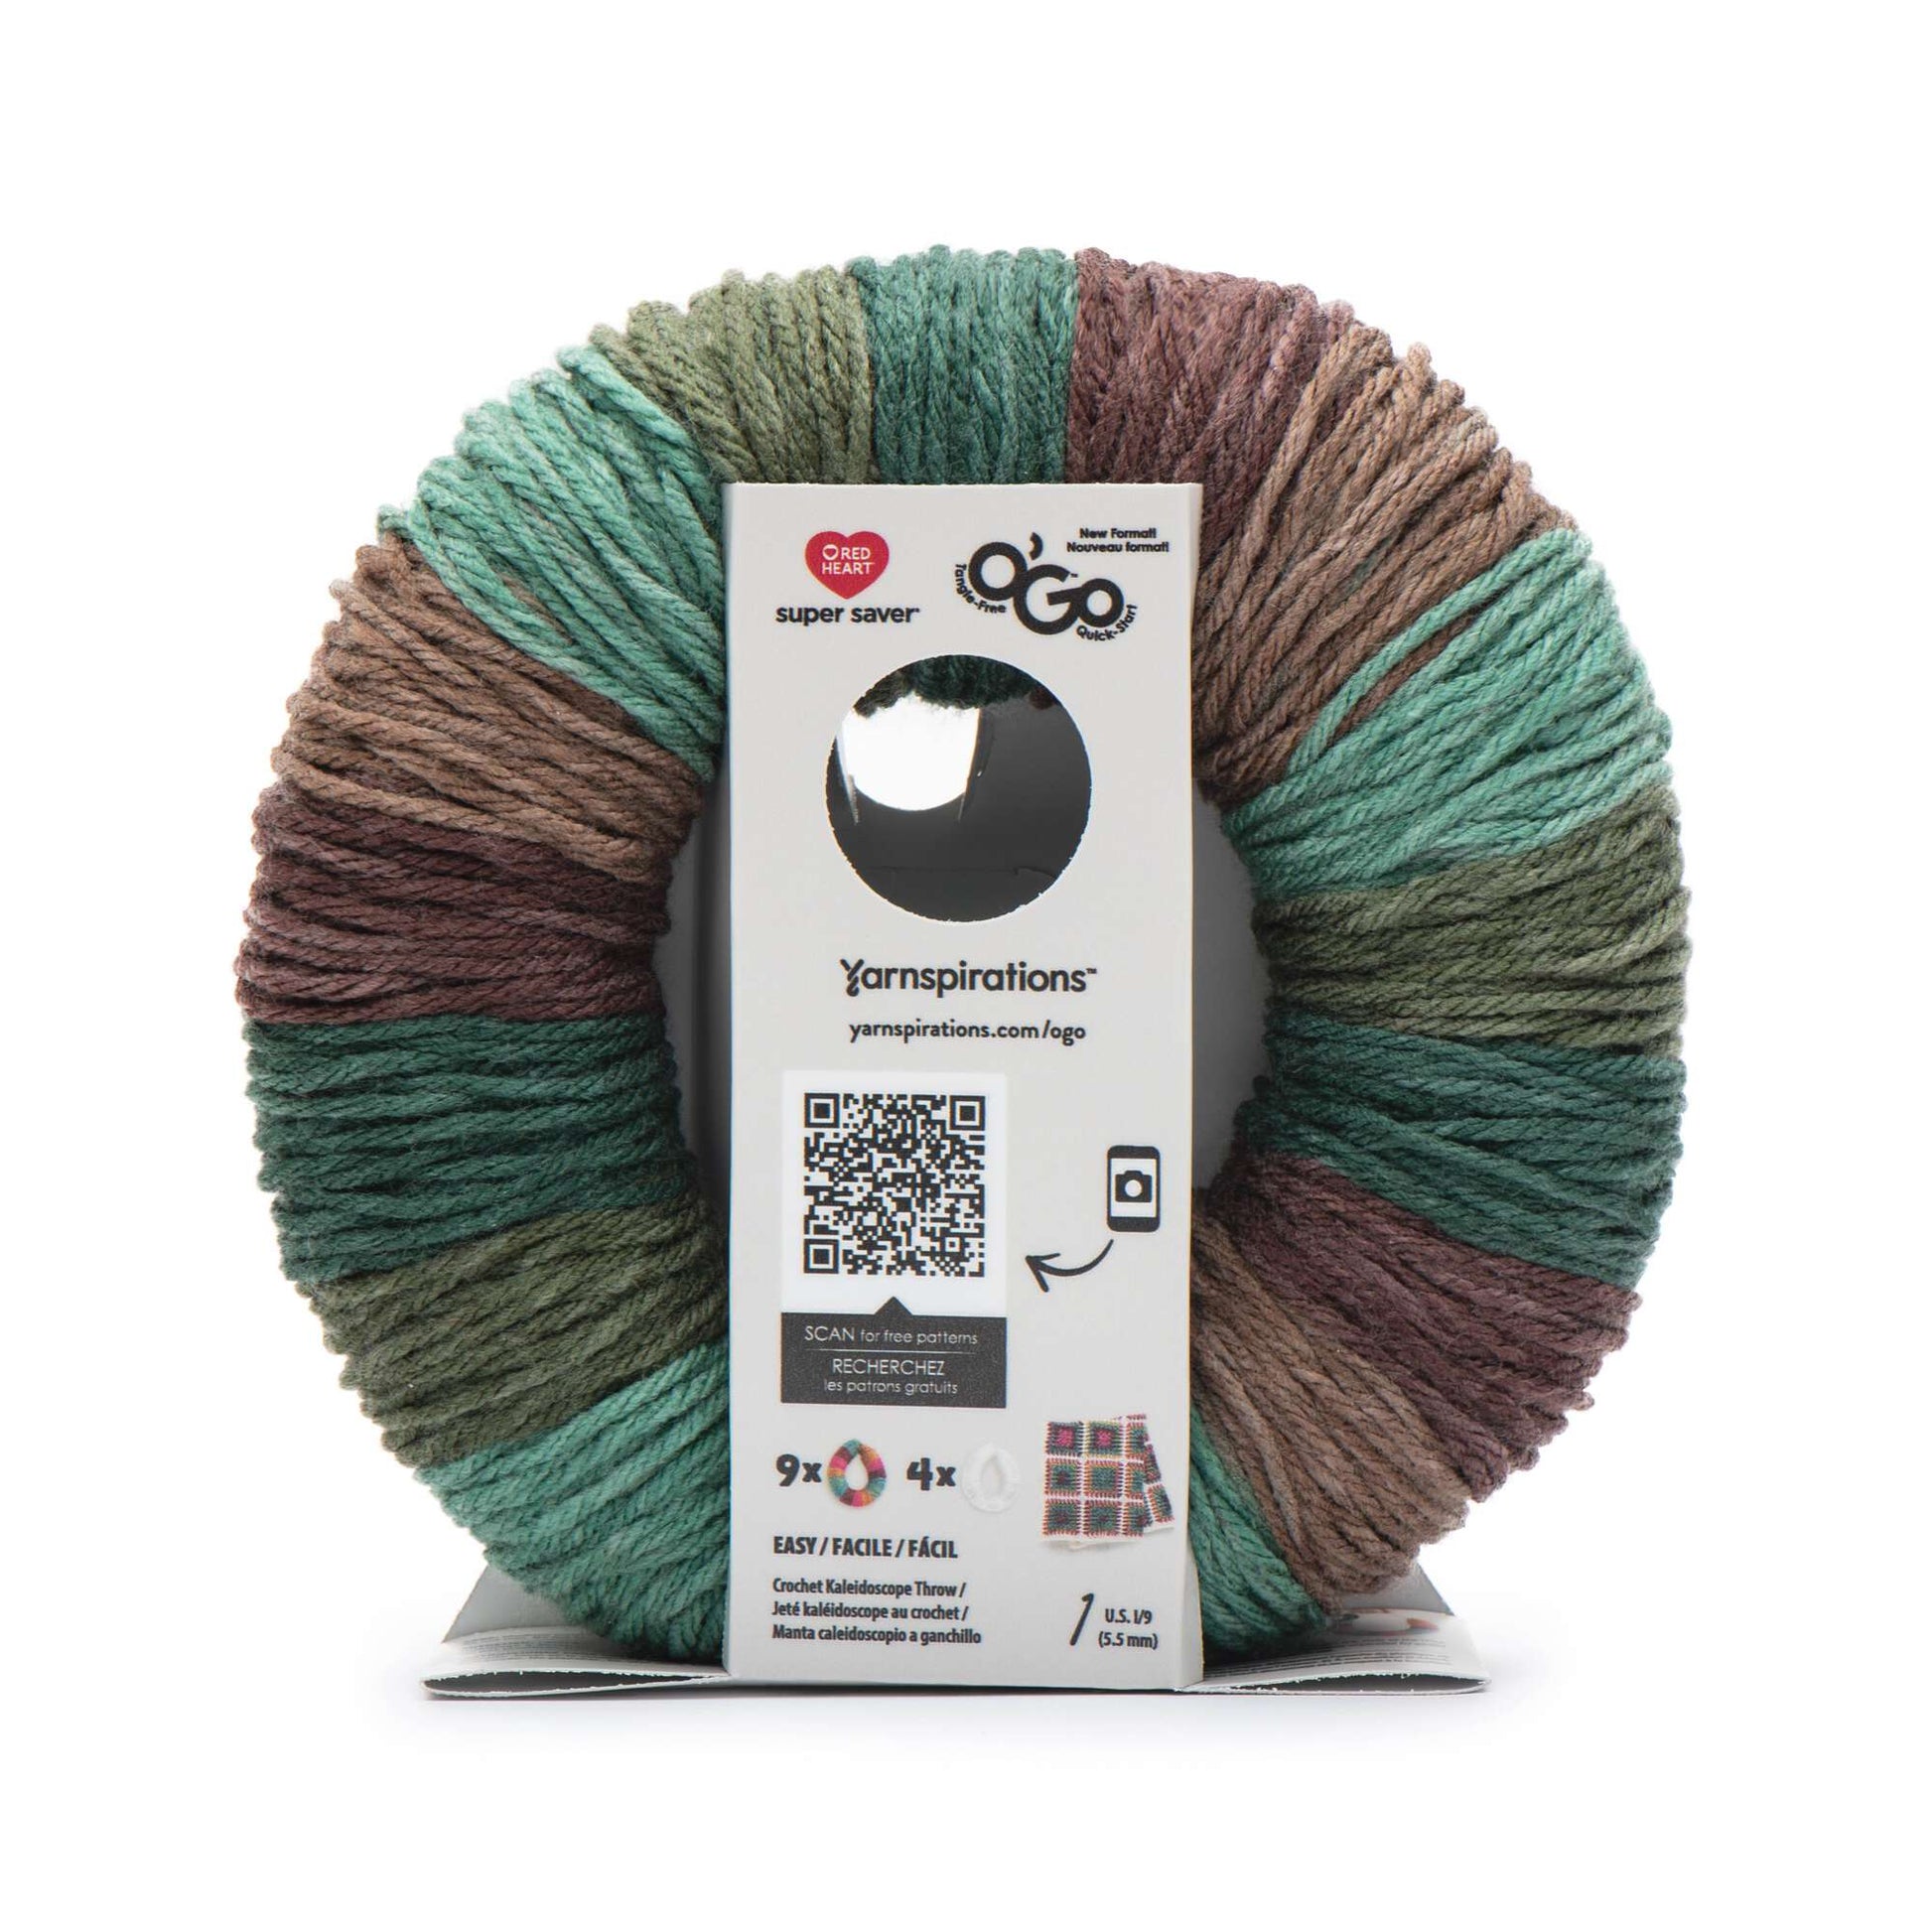 Red Heart Super Saver O'Go Yarn - Clearance Shades* Forest